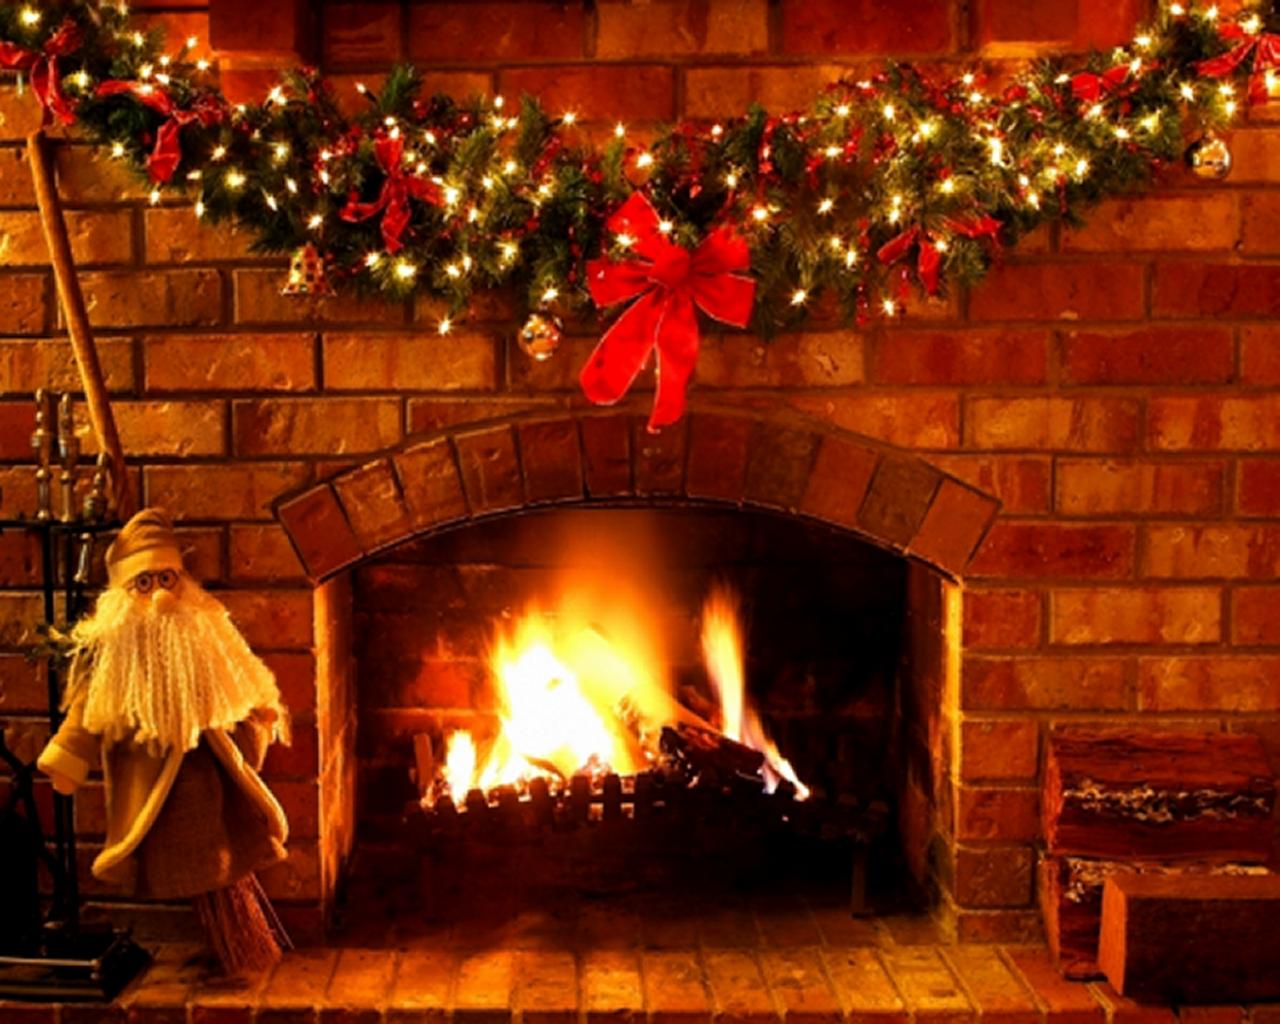 Fireplace Background Wallpapeers Win10 Themes